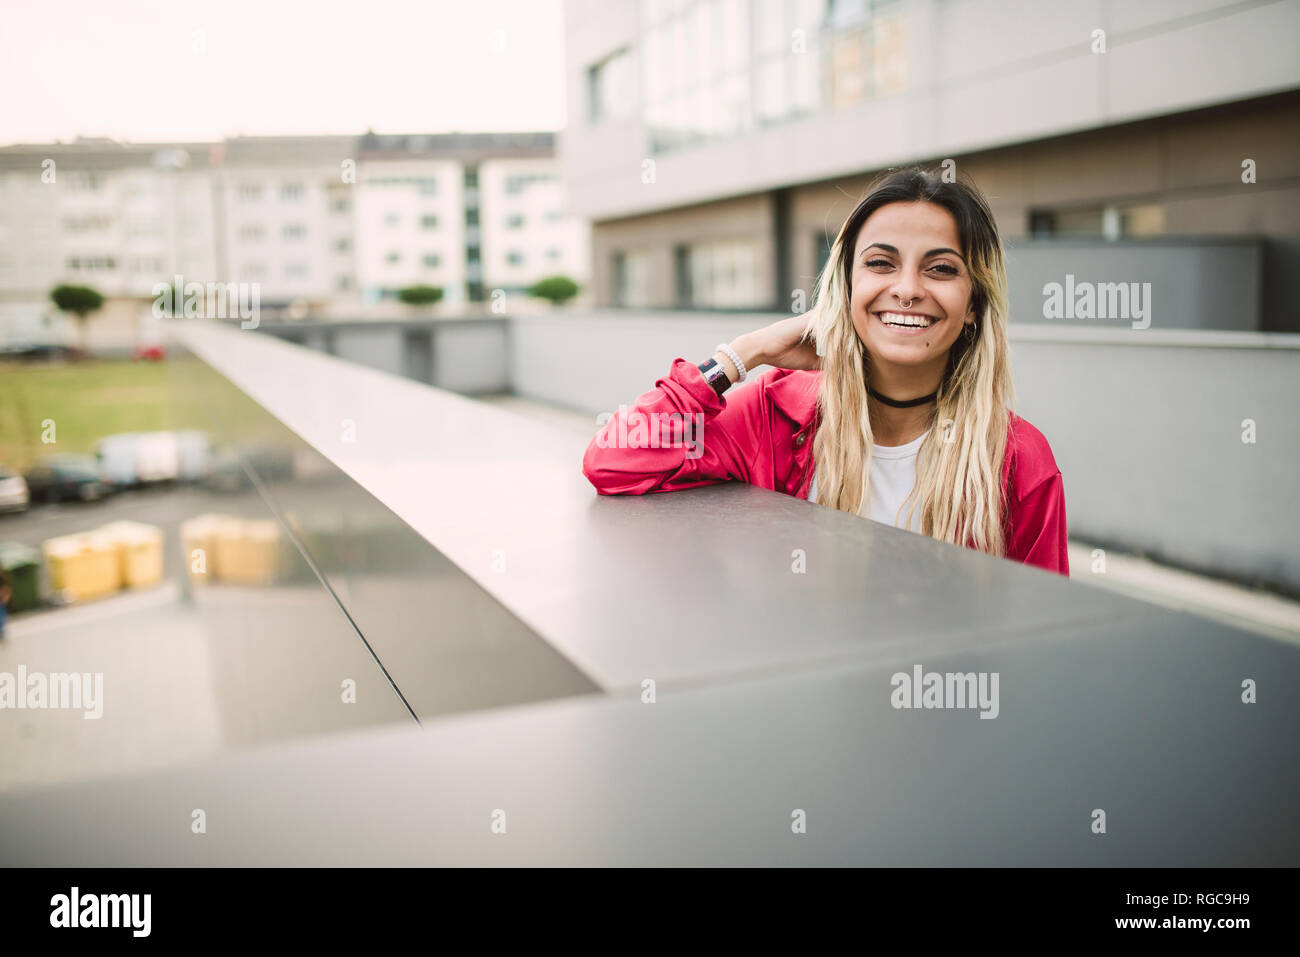 Portrait of a cheerful young woman leaning on a parapet Stock Photo